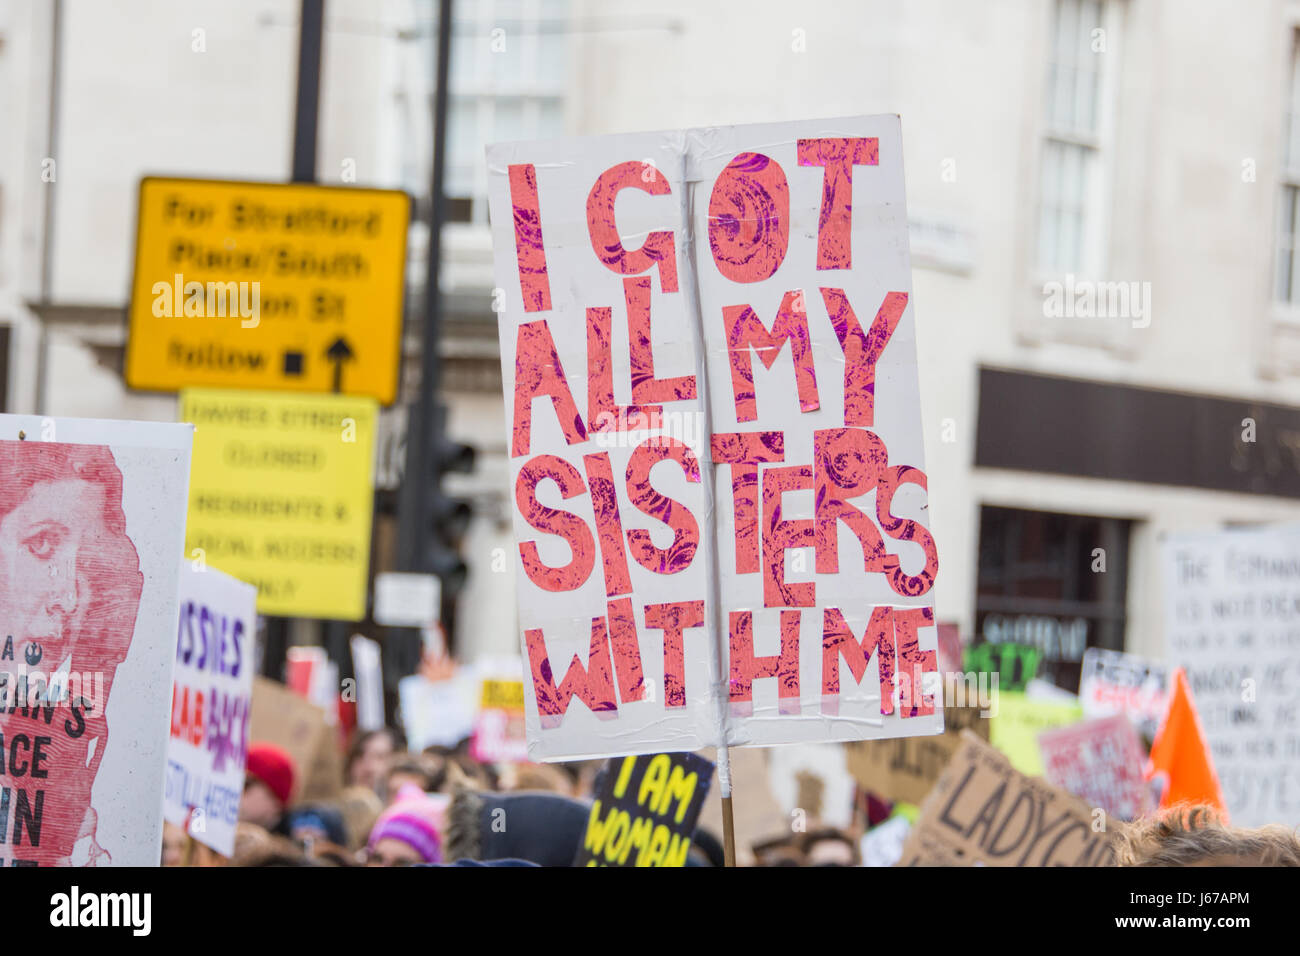 Women's March against Trump, got all my sisters with me sign Stock Photo